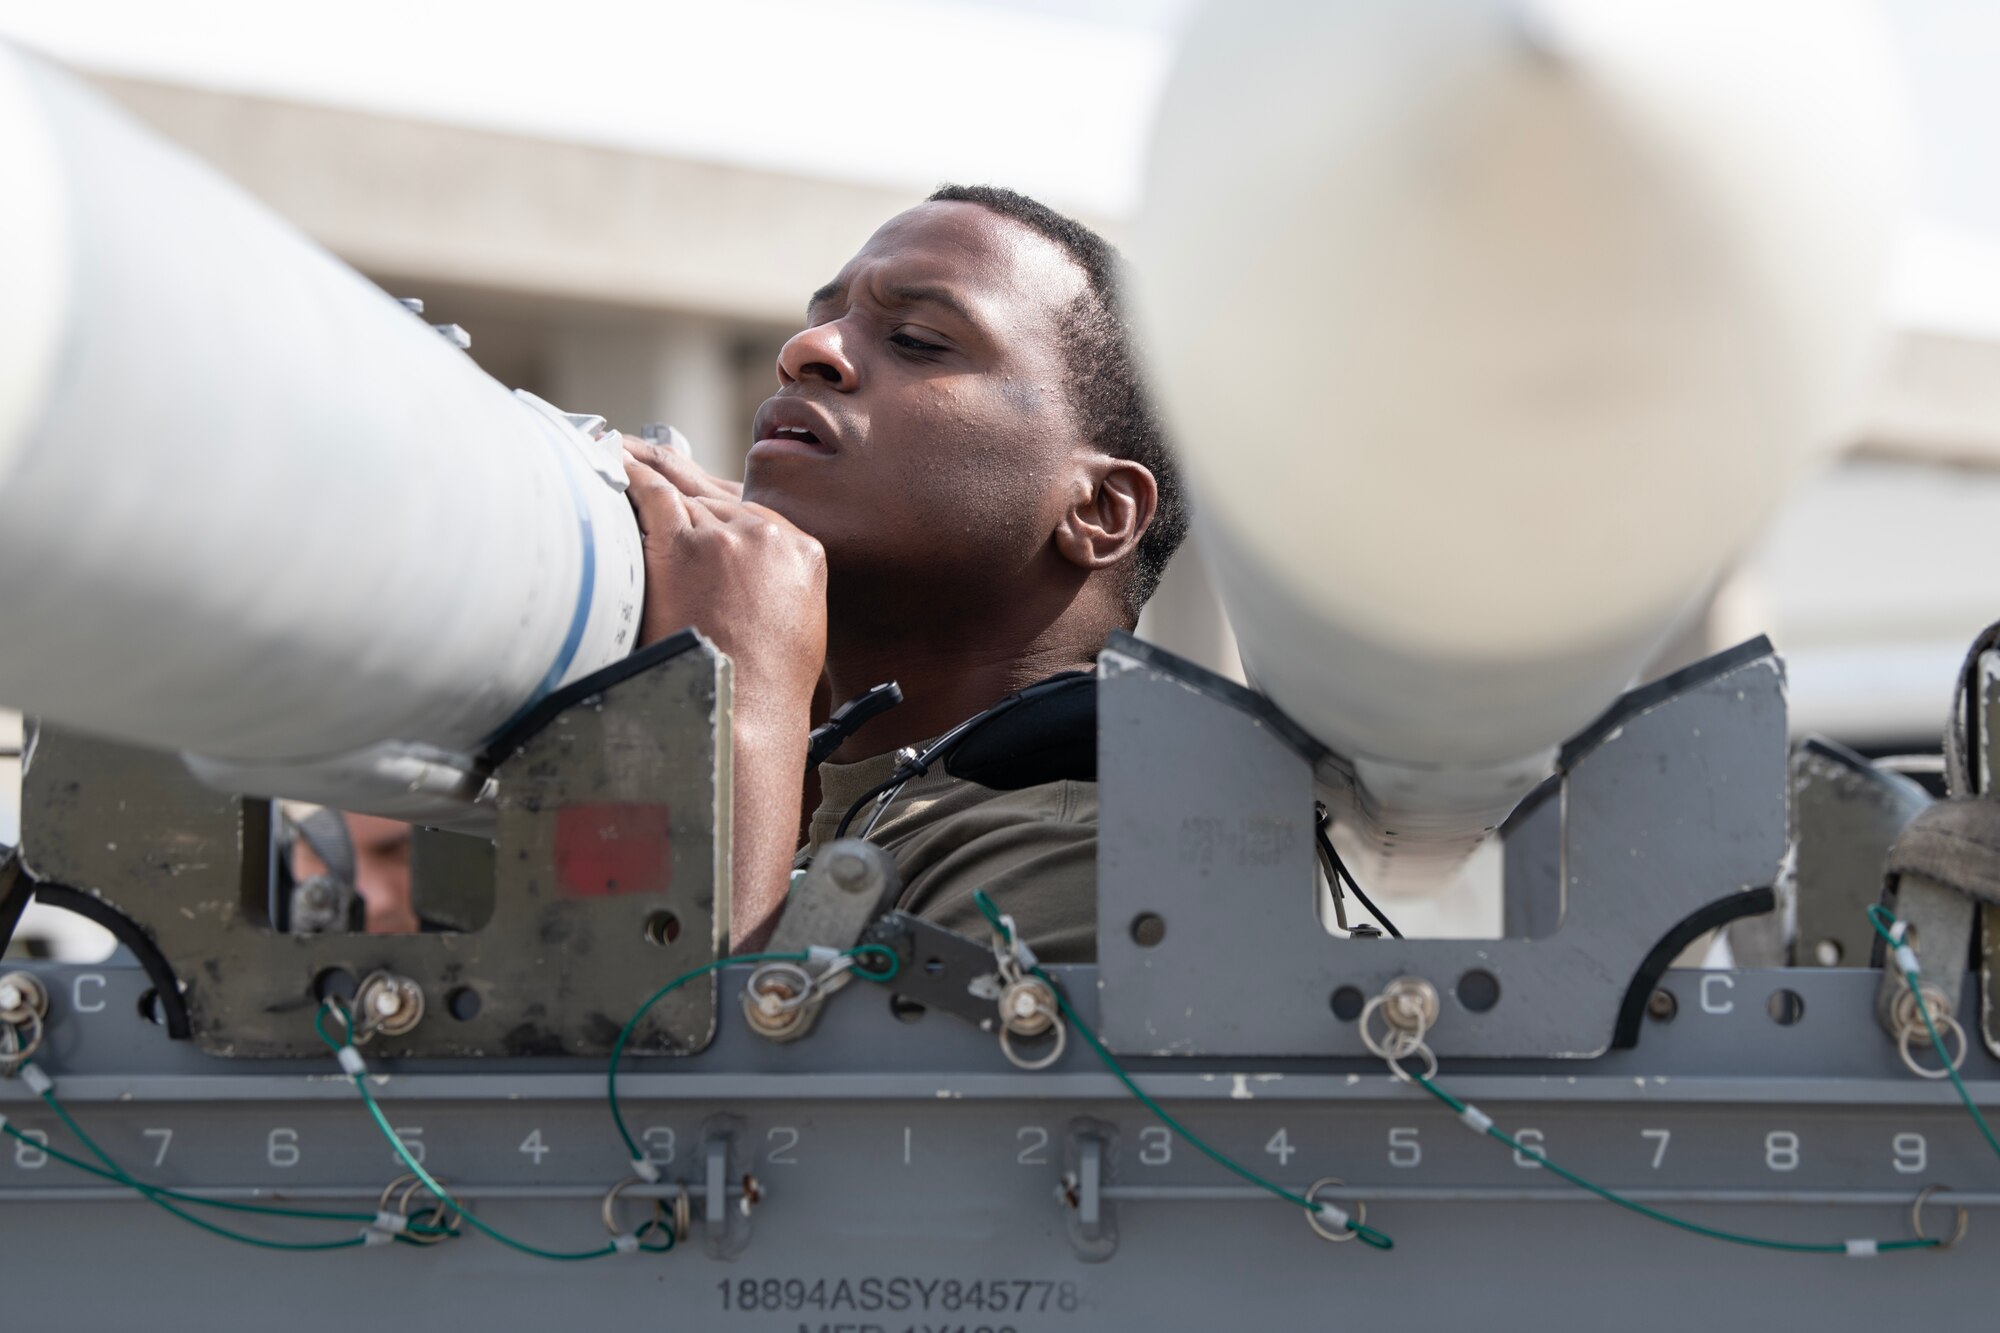 An Airman from the 18th Aircraft Maintenance Squadron prepares an AIM-120 Advanced Medium Range Air-to-Air Missile to be loaded onto an F-15C Eagle during a weapons load competition at Kadena Air Base, Japan, Nov. 17, 2023. Kadena’s aircraft weapons load teams face off quarterly to test the skill and professionalism of Kadena Airmen while building camaraderie among the base’s diverse team of aircraft maintainers. (U.S. Air Force Photo by Staff Sgt. Jessi Roth)